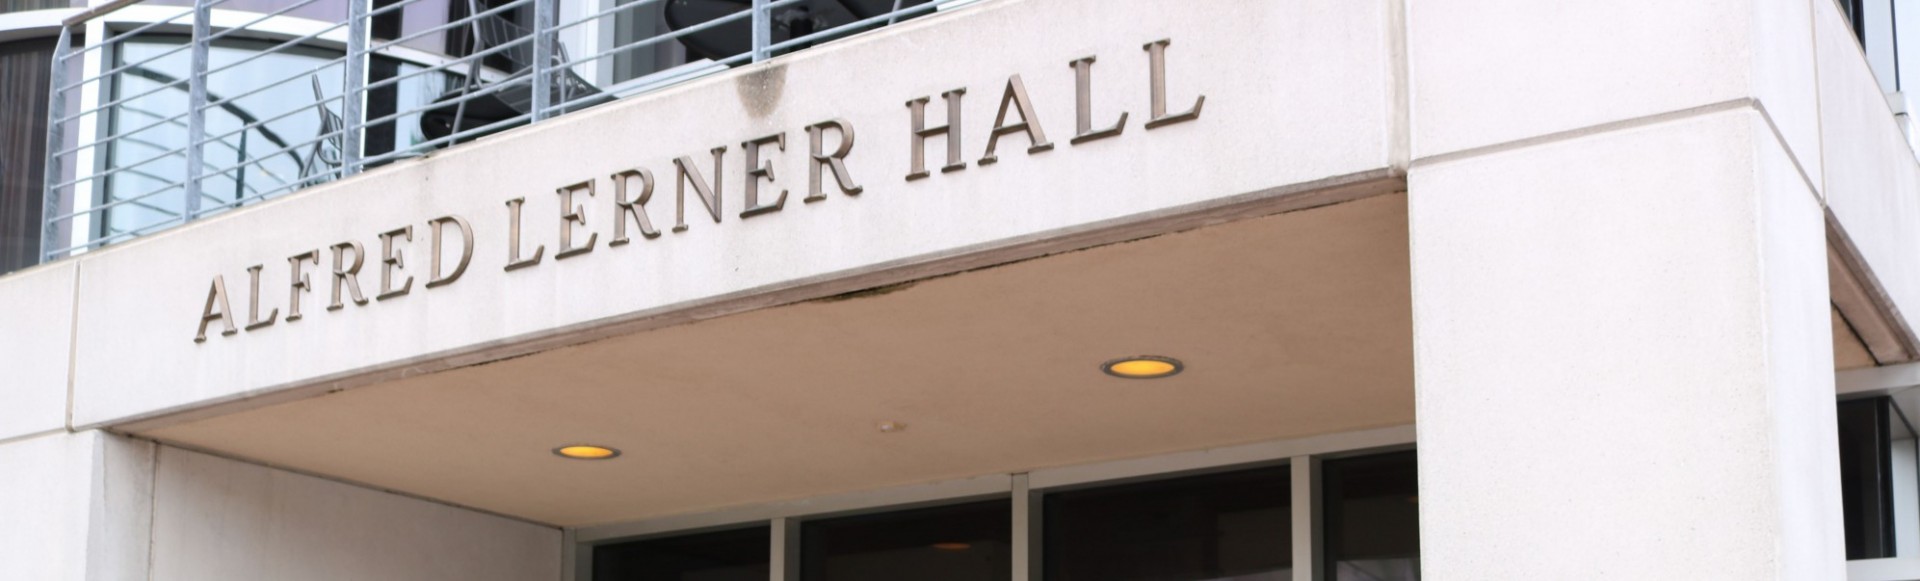 Exterior photo of Lerner Hall